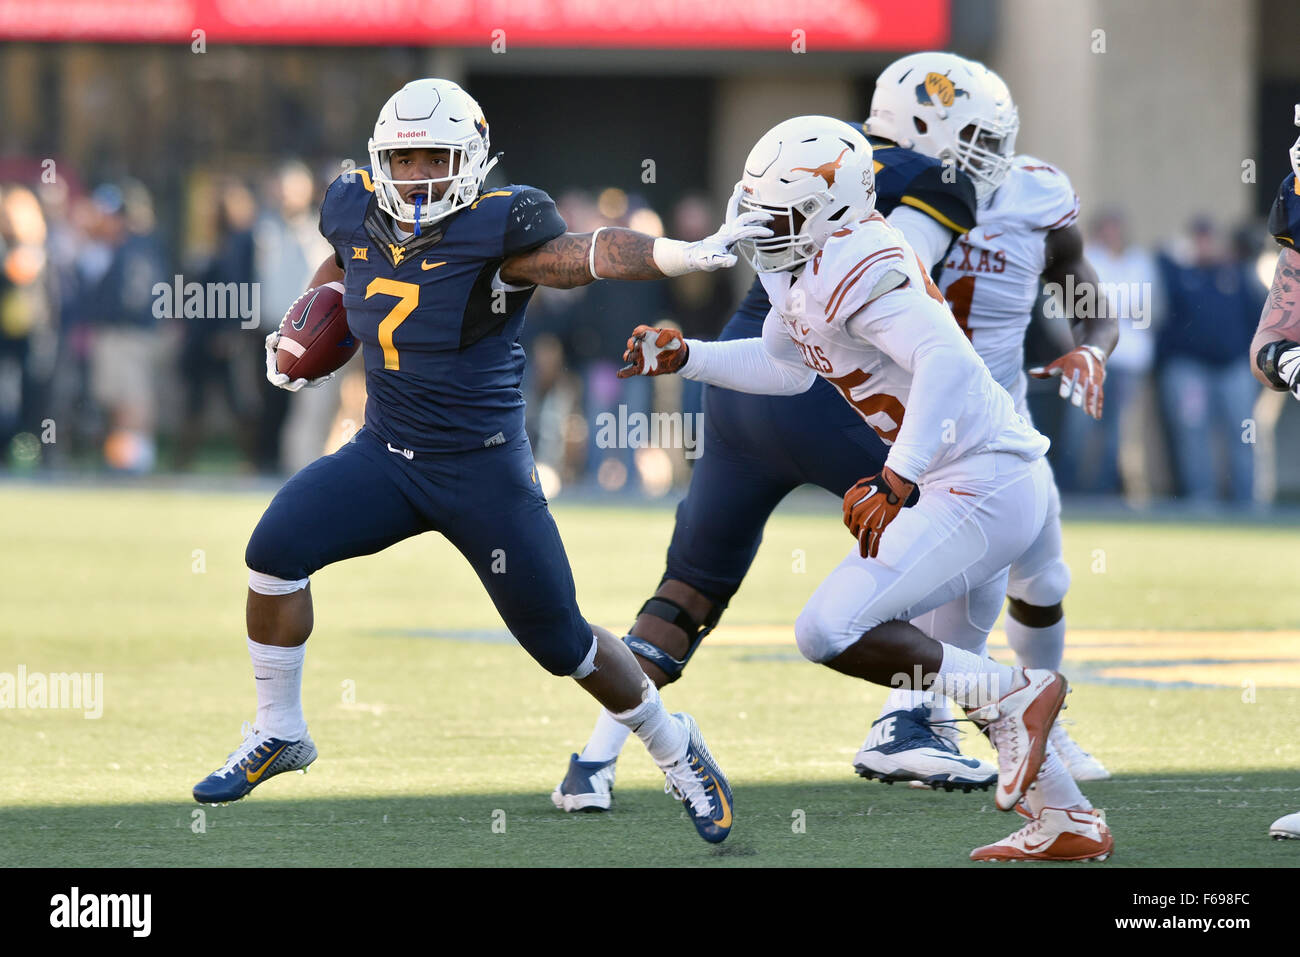 Morgantown, West VIrginia, USA. 14th Nov, 2015. West Virginia Mountaineers running back RUSHEL SHELL (7) stiff arms Texas Longhorns linebacker ANTHONY WHEELER (45) during a Big 12 conference football game played at Mountaineer Field at Milan Puskar Stadium in Morgantown, WV. WVU beat Texas 38-20. Credit:  Ken Inness/ZUMA Wire/Alamy Live News Stock Photo